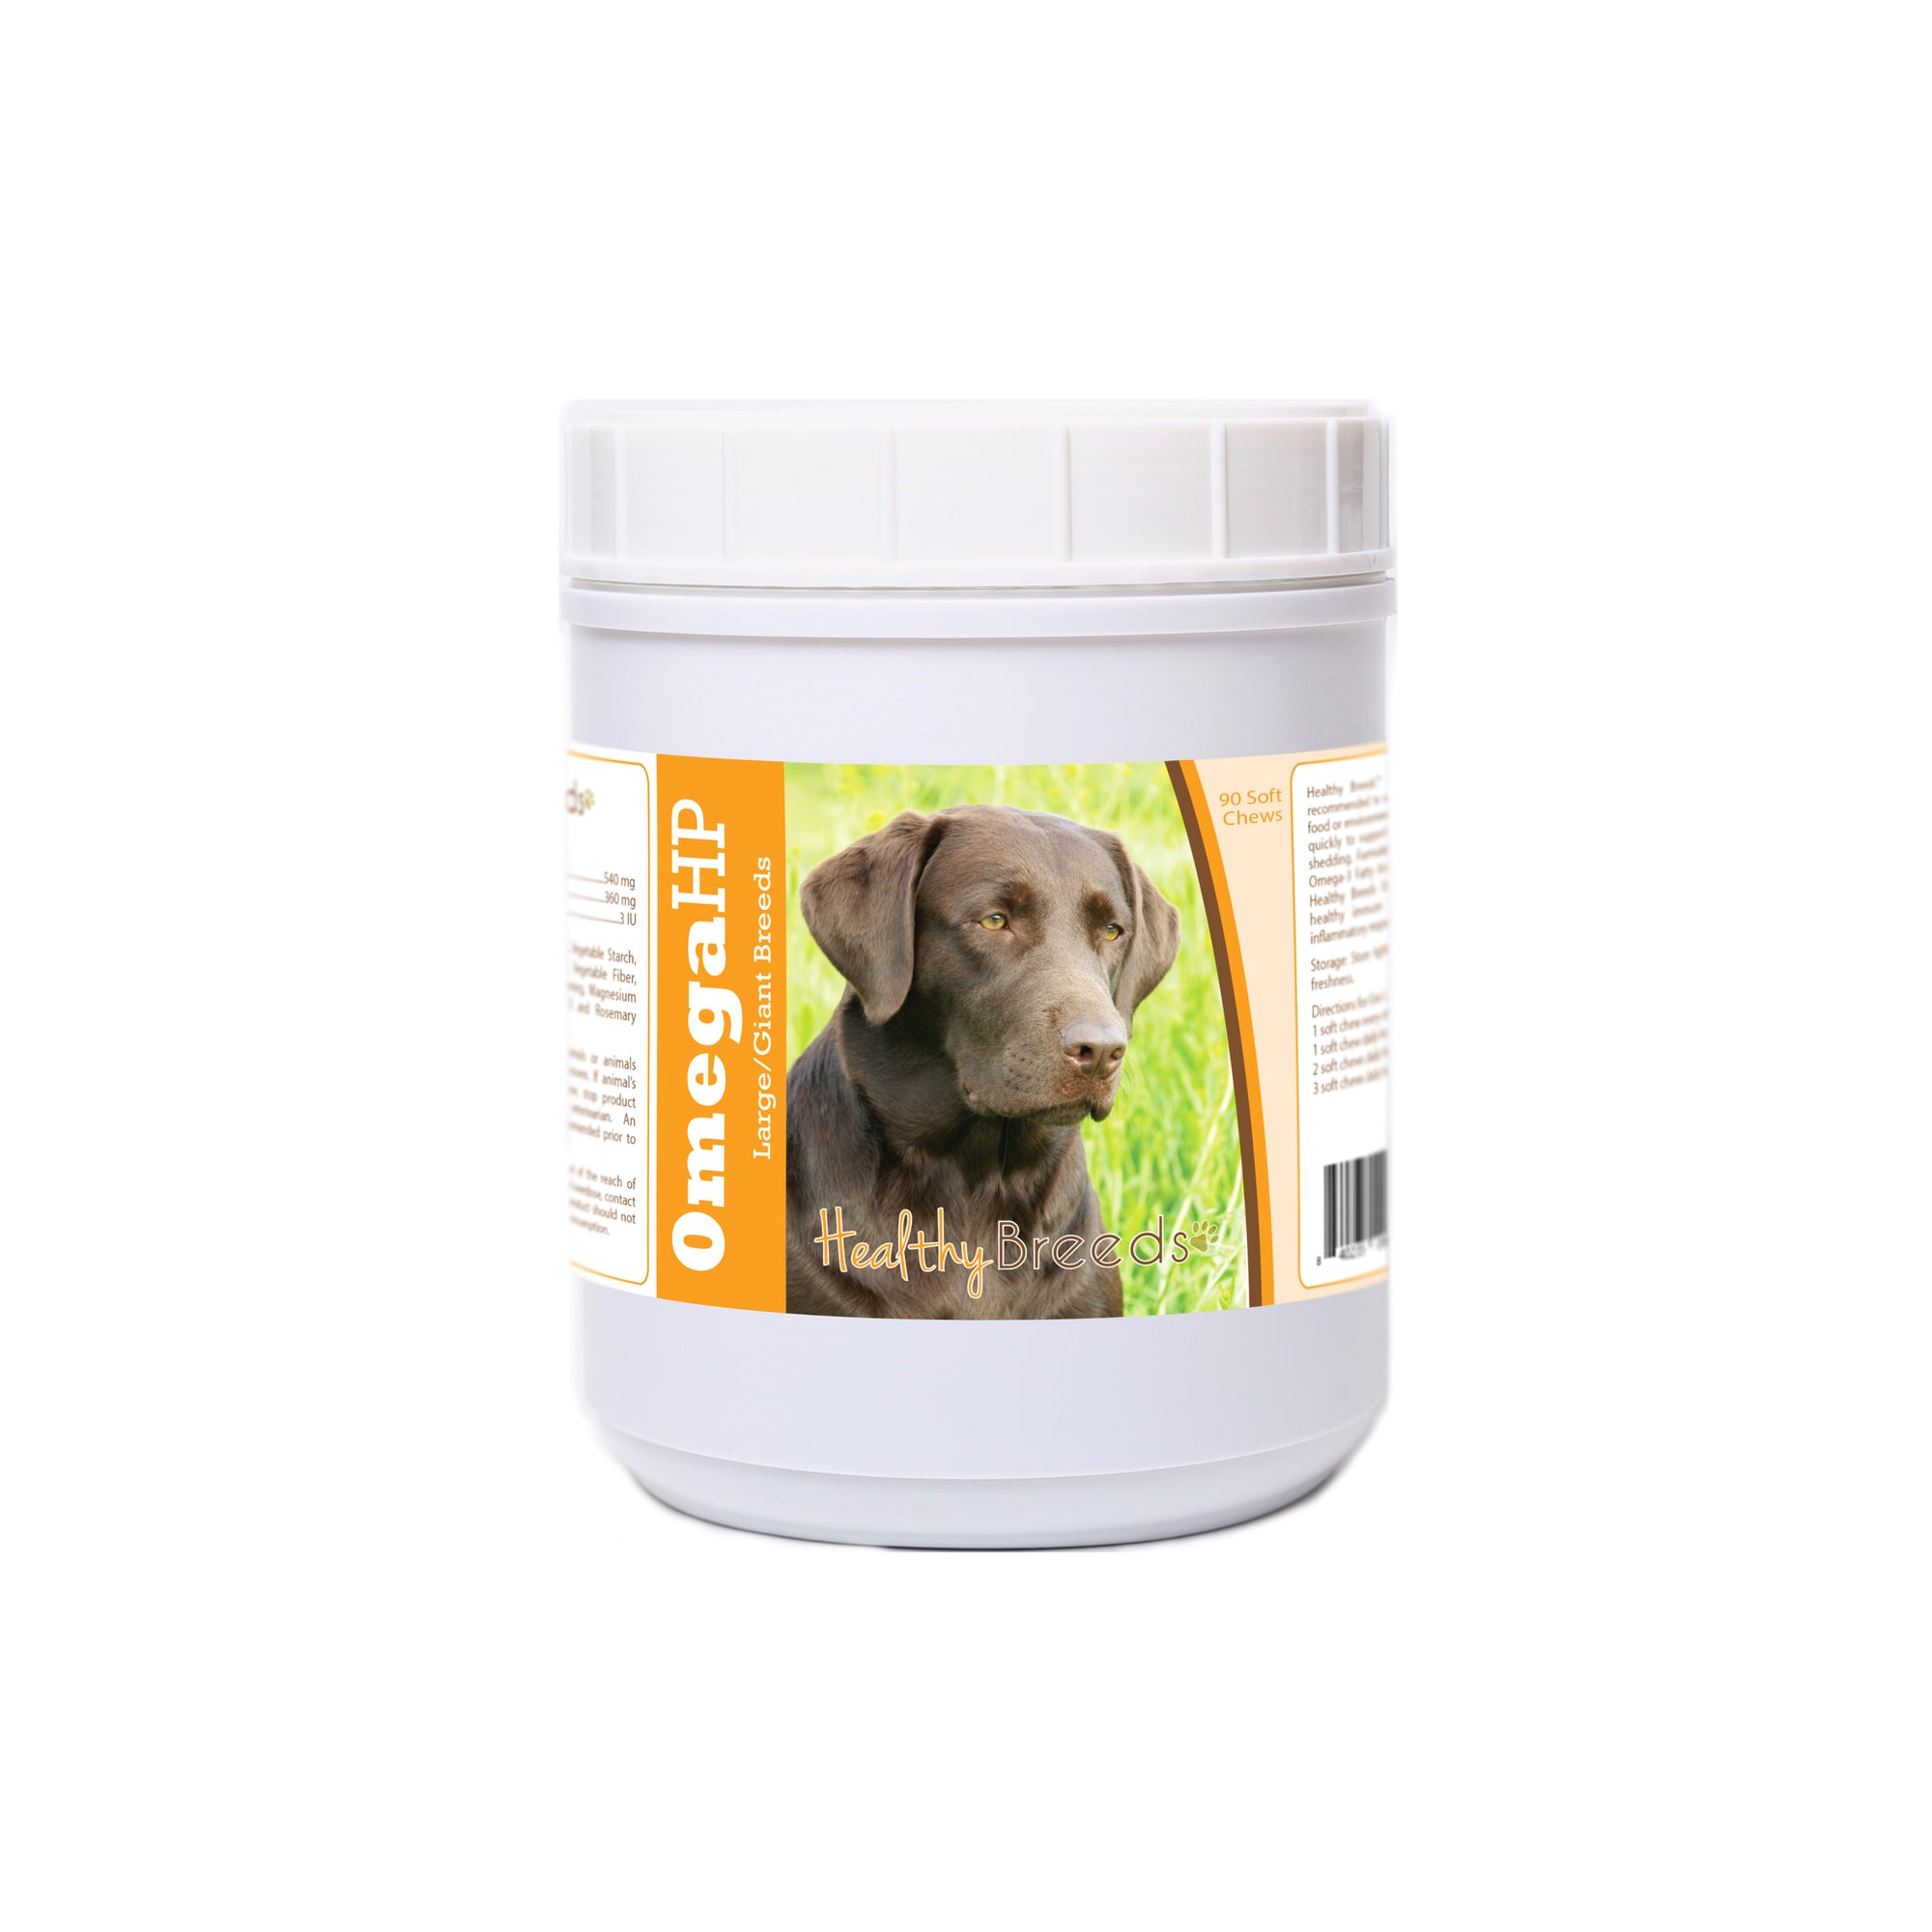 Healthy Breeds Labrador Retriever Omega HP Fatty Acid Skin and Coat Support Soft Chews 90 Count